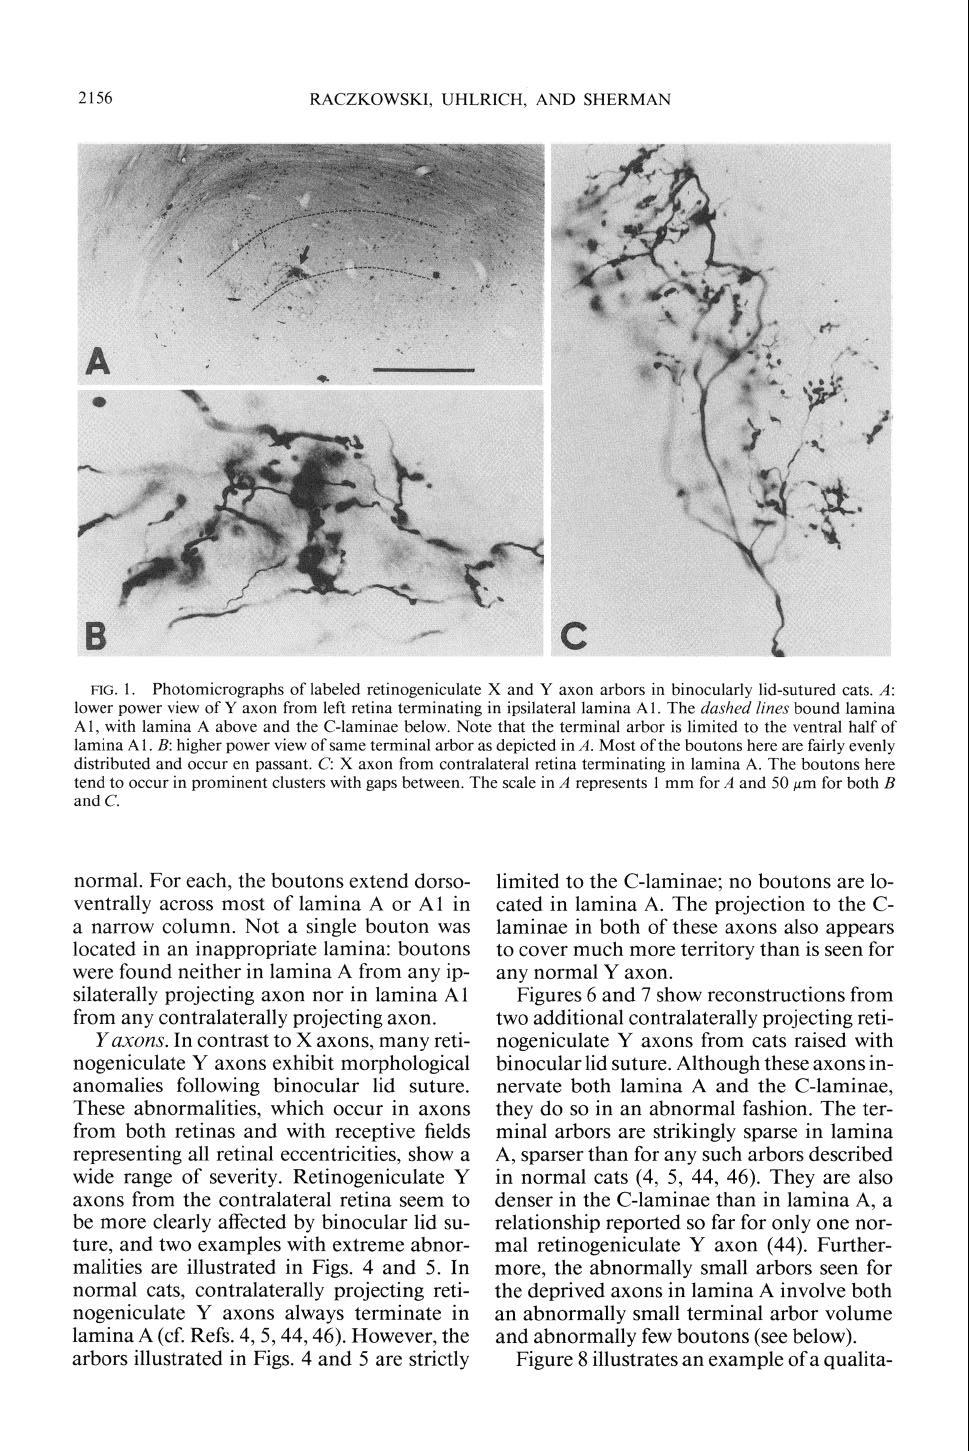 2156 RACZKOWSKI, UHLRICH, AND SHERMAN RG. 1. Photomicrographs of labeled retinogeniculate X and Y axon arbors in binocularly lid-sutured cats.